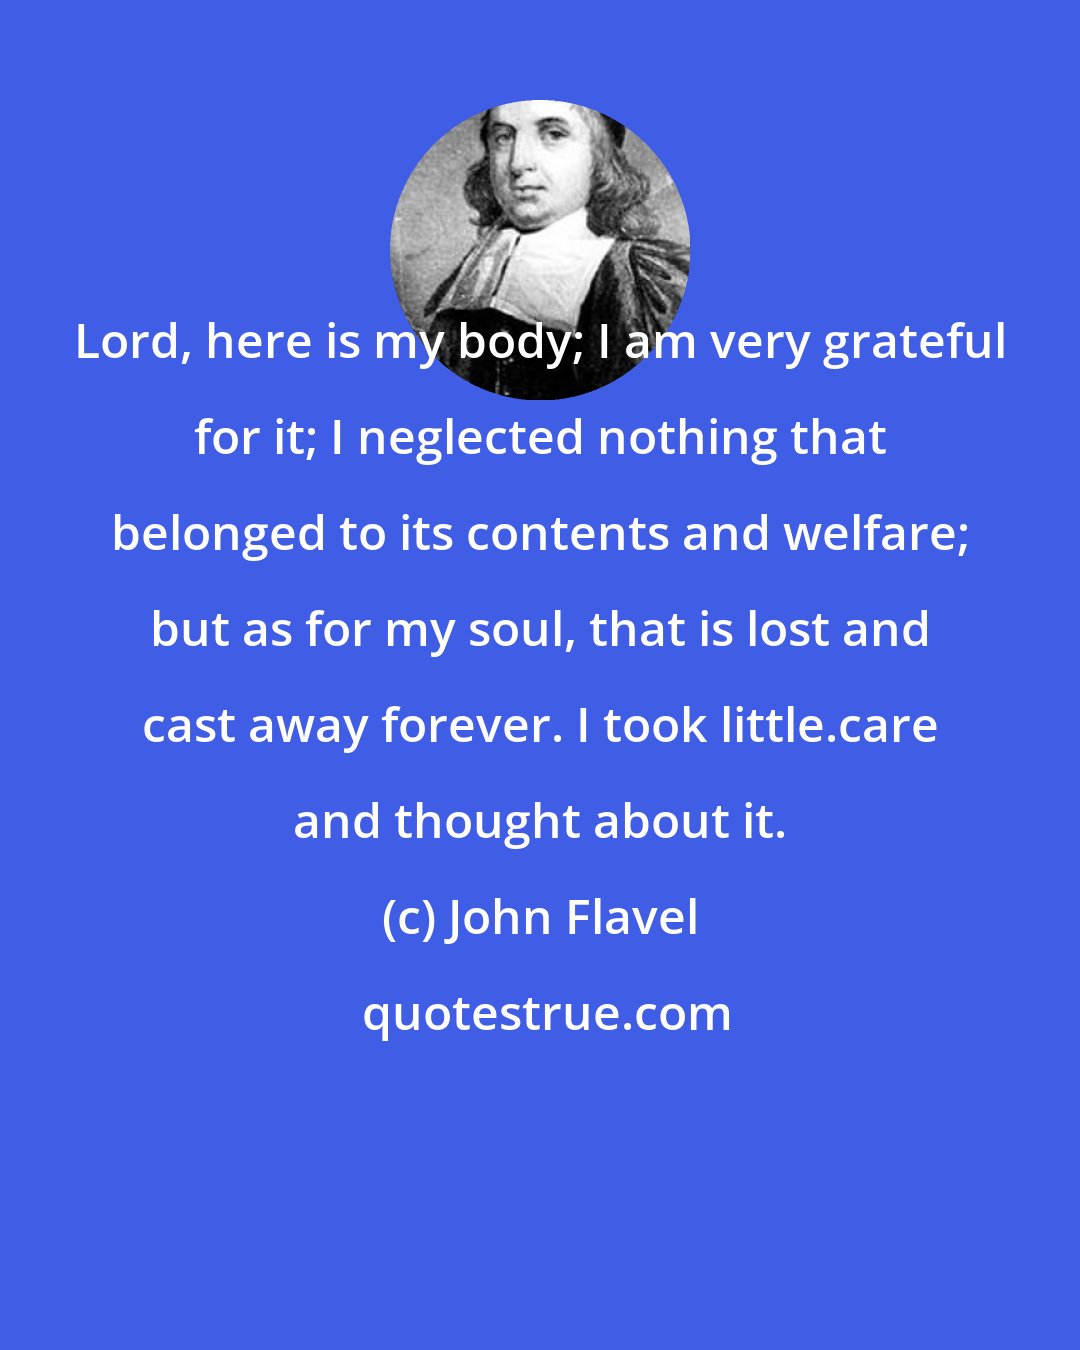 John Flavel: Lord, here is my body; I am very grateful for it; I neglected nothing that belonged to its contents and welfare; but as for my soul, that is lost and cast away forever. I took little.care and thought about it.